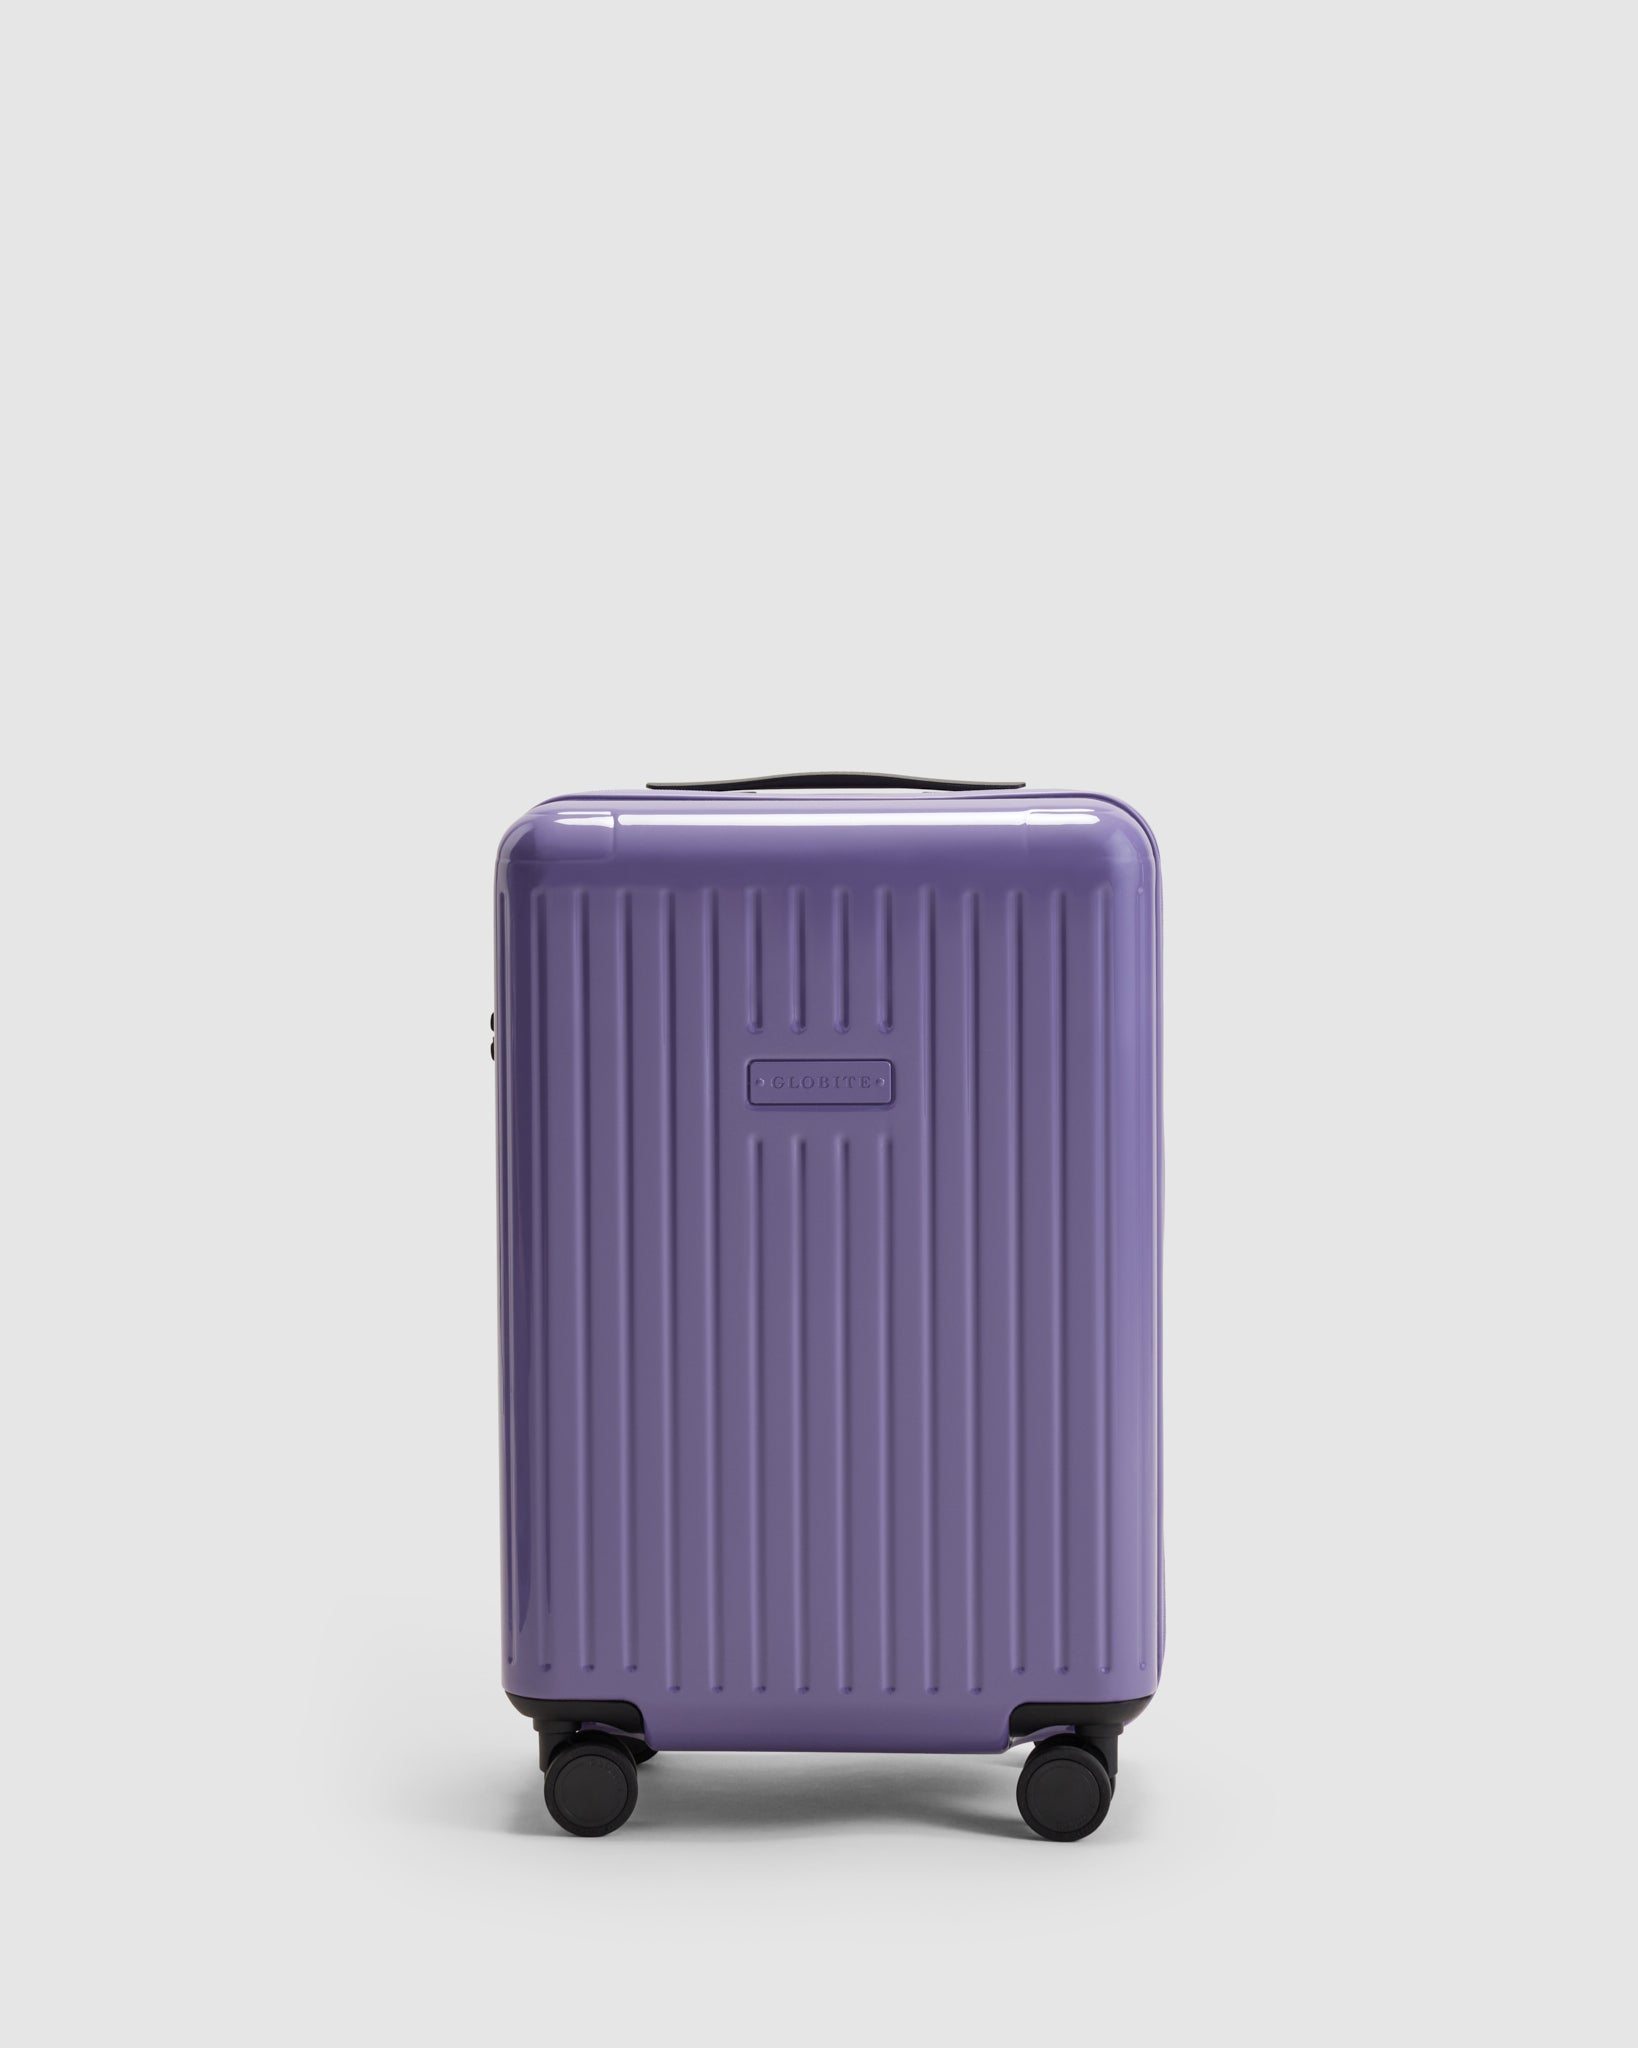 Carry On in Violet